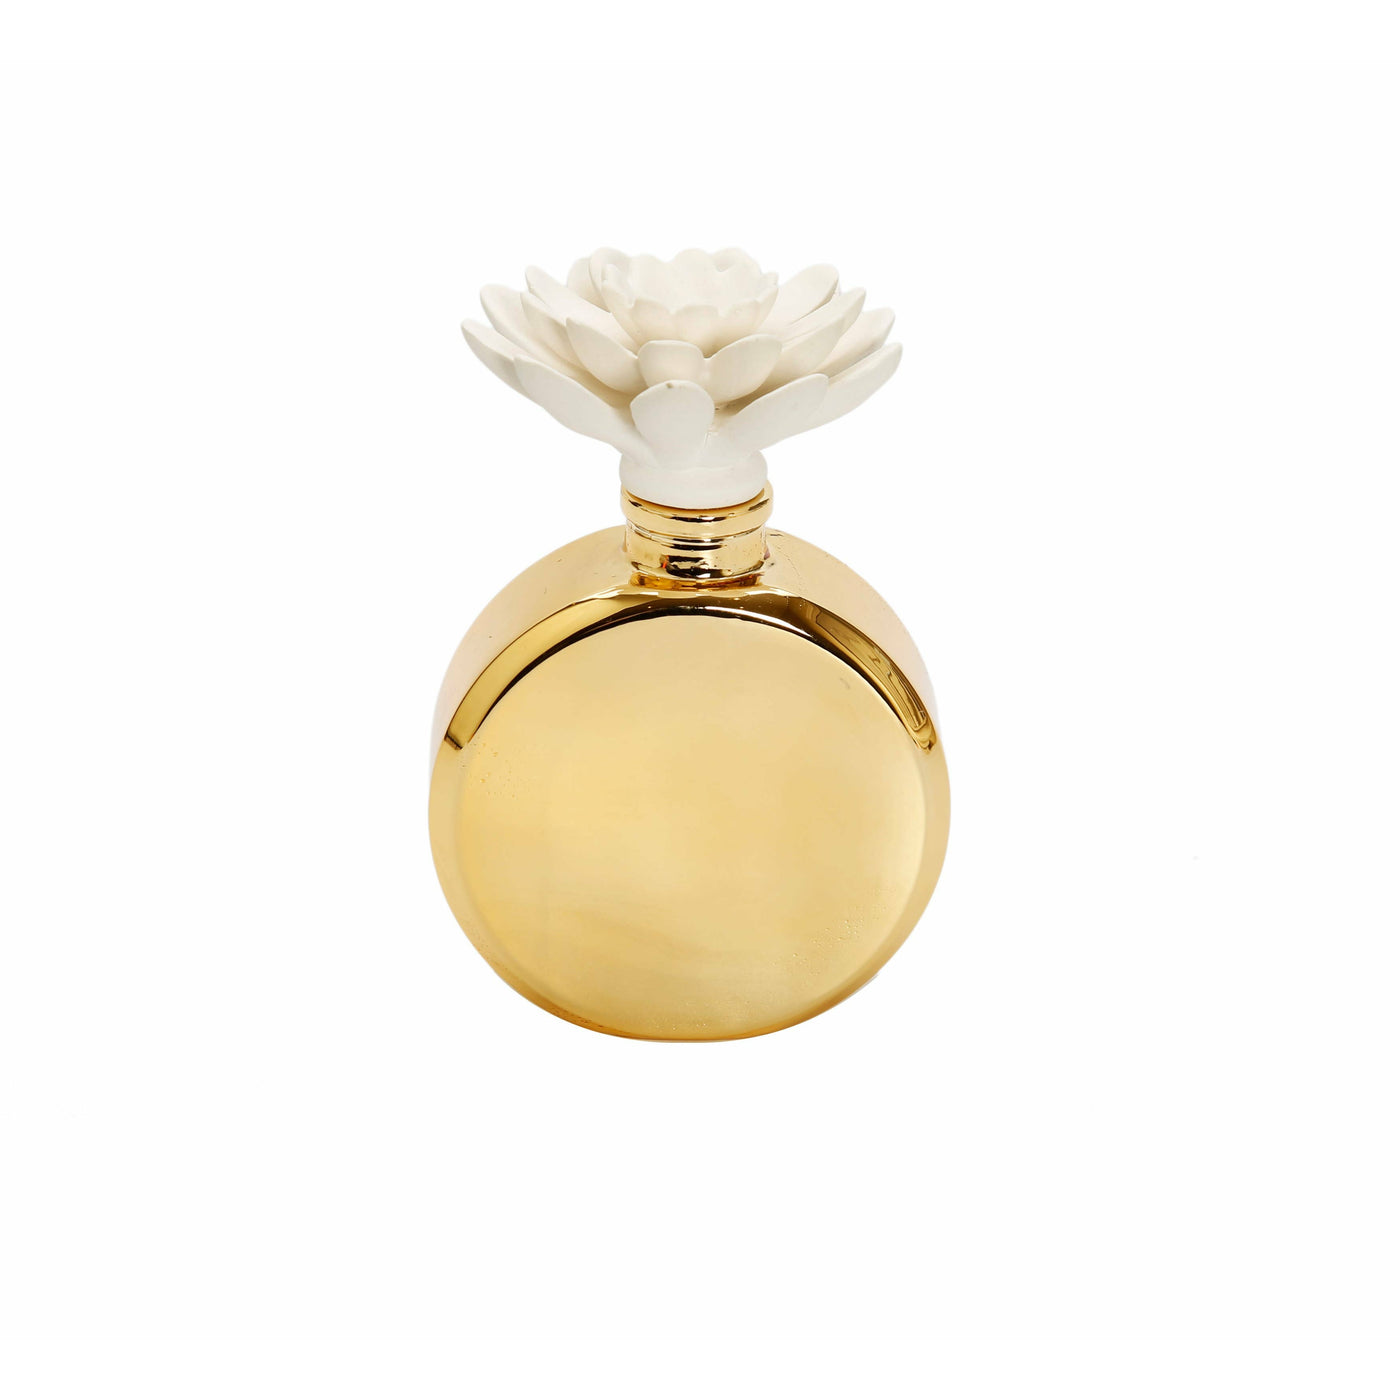 Gold Bottle Diffuser with White Flower, "Iris & Rose" Scent